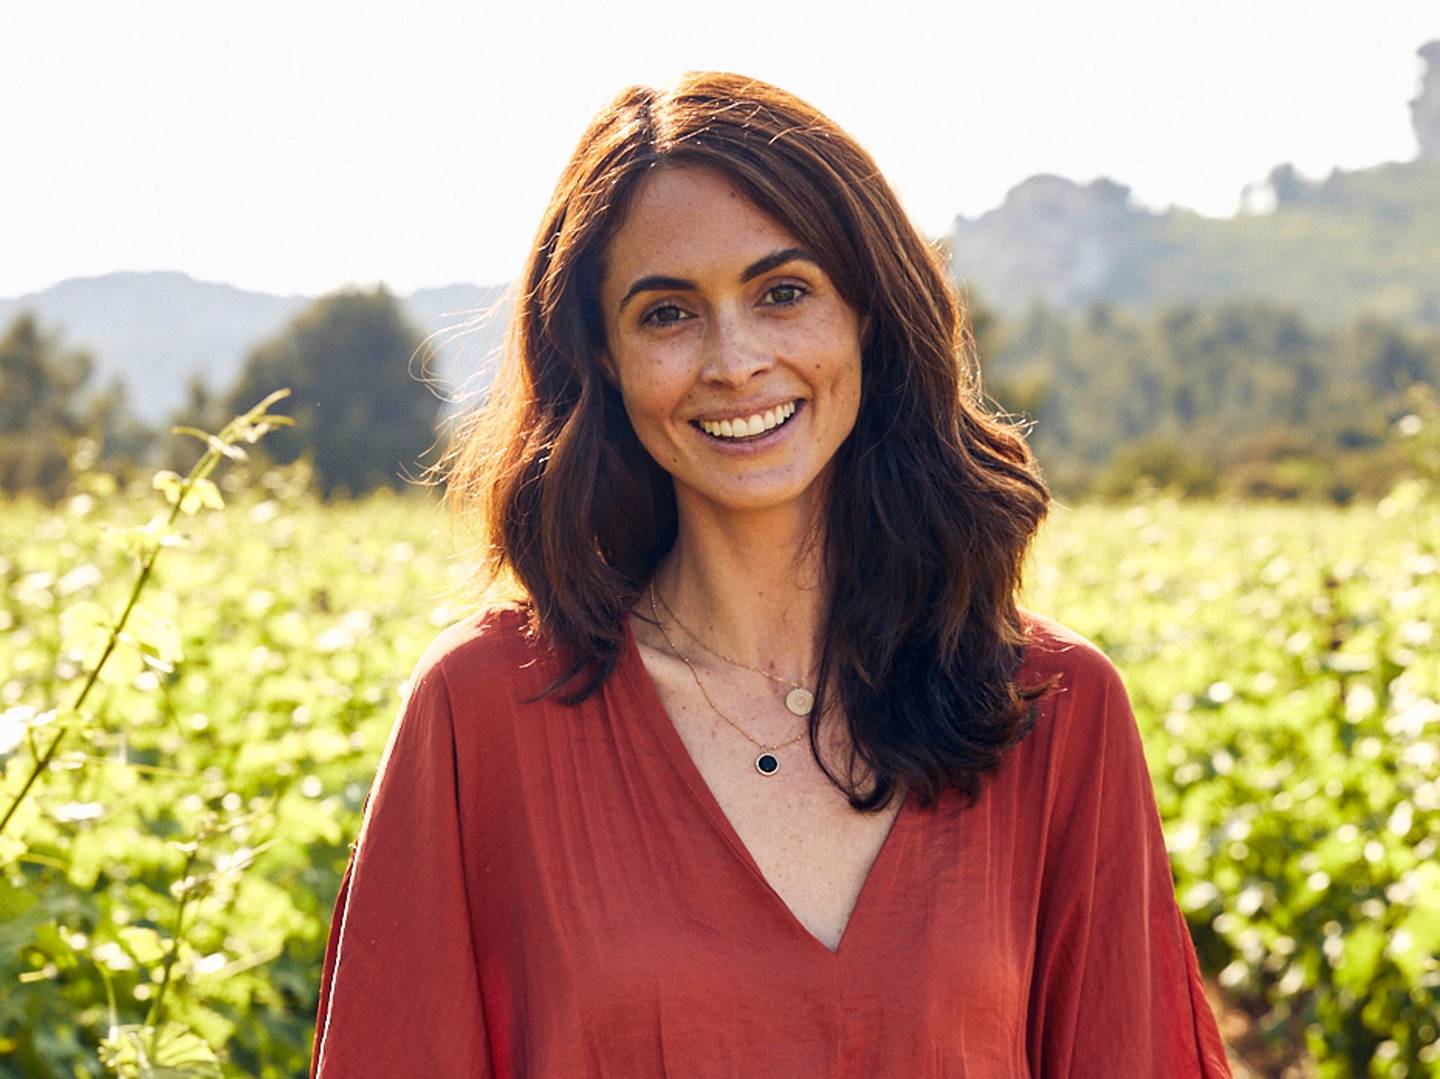 Maggie Frerejean-Taittinger, co-founder of French Bloom, says the wellness movement has contributed to a marked decline in youth drinking in high-income countries. Photo: French Bloom